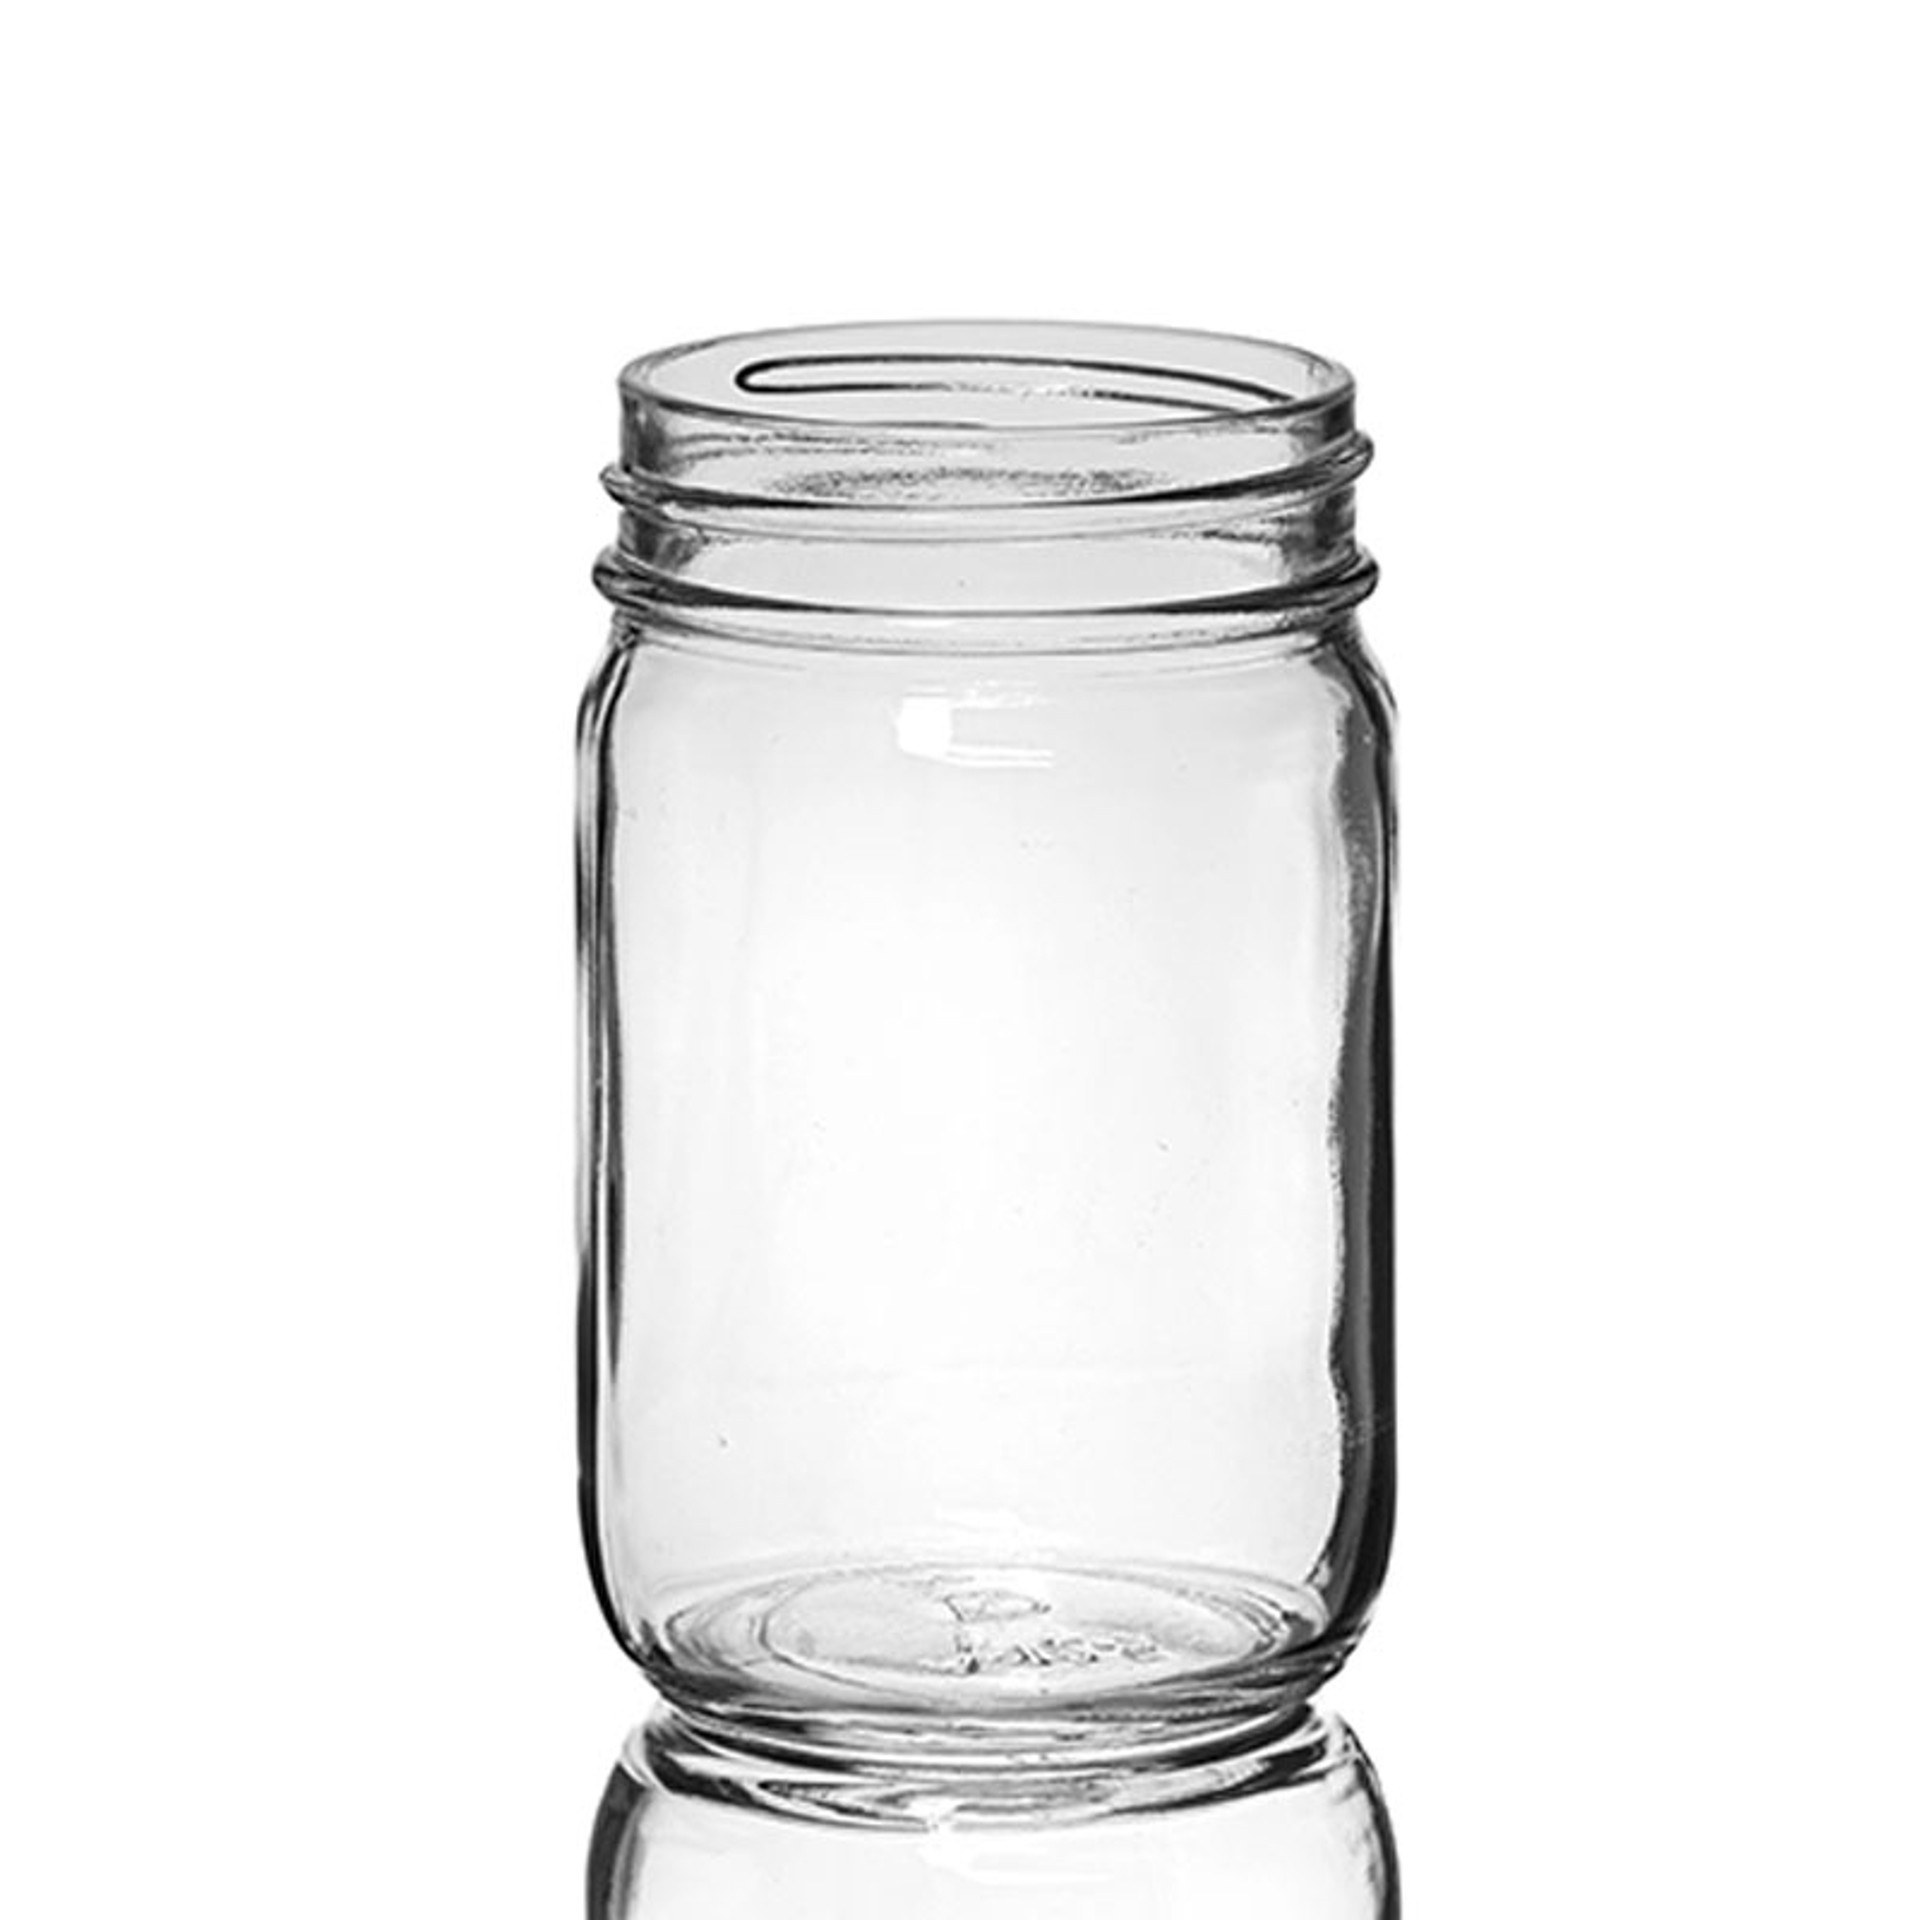 Jaisie.W Mason Jars 8 oz with Lids&Bands 12Pack, Small Canning Jars 8 oz -  8 oz Glass Jars with Lids for Oats/Jelly/Jams/Crafts/Candles